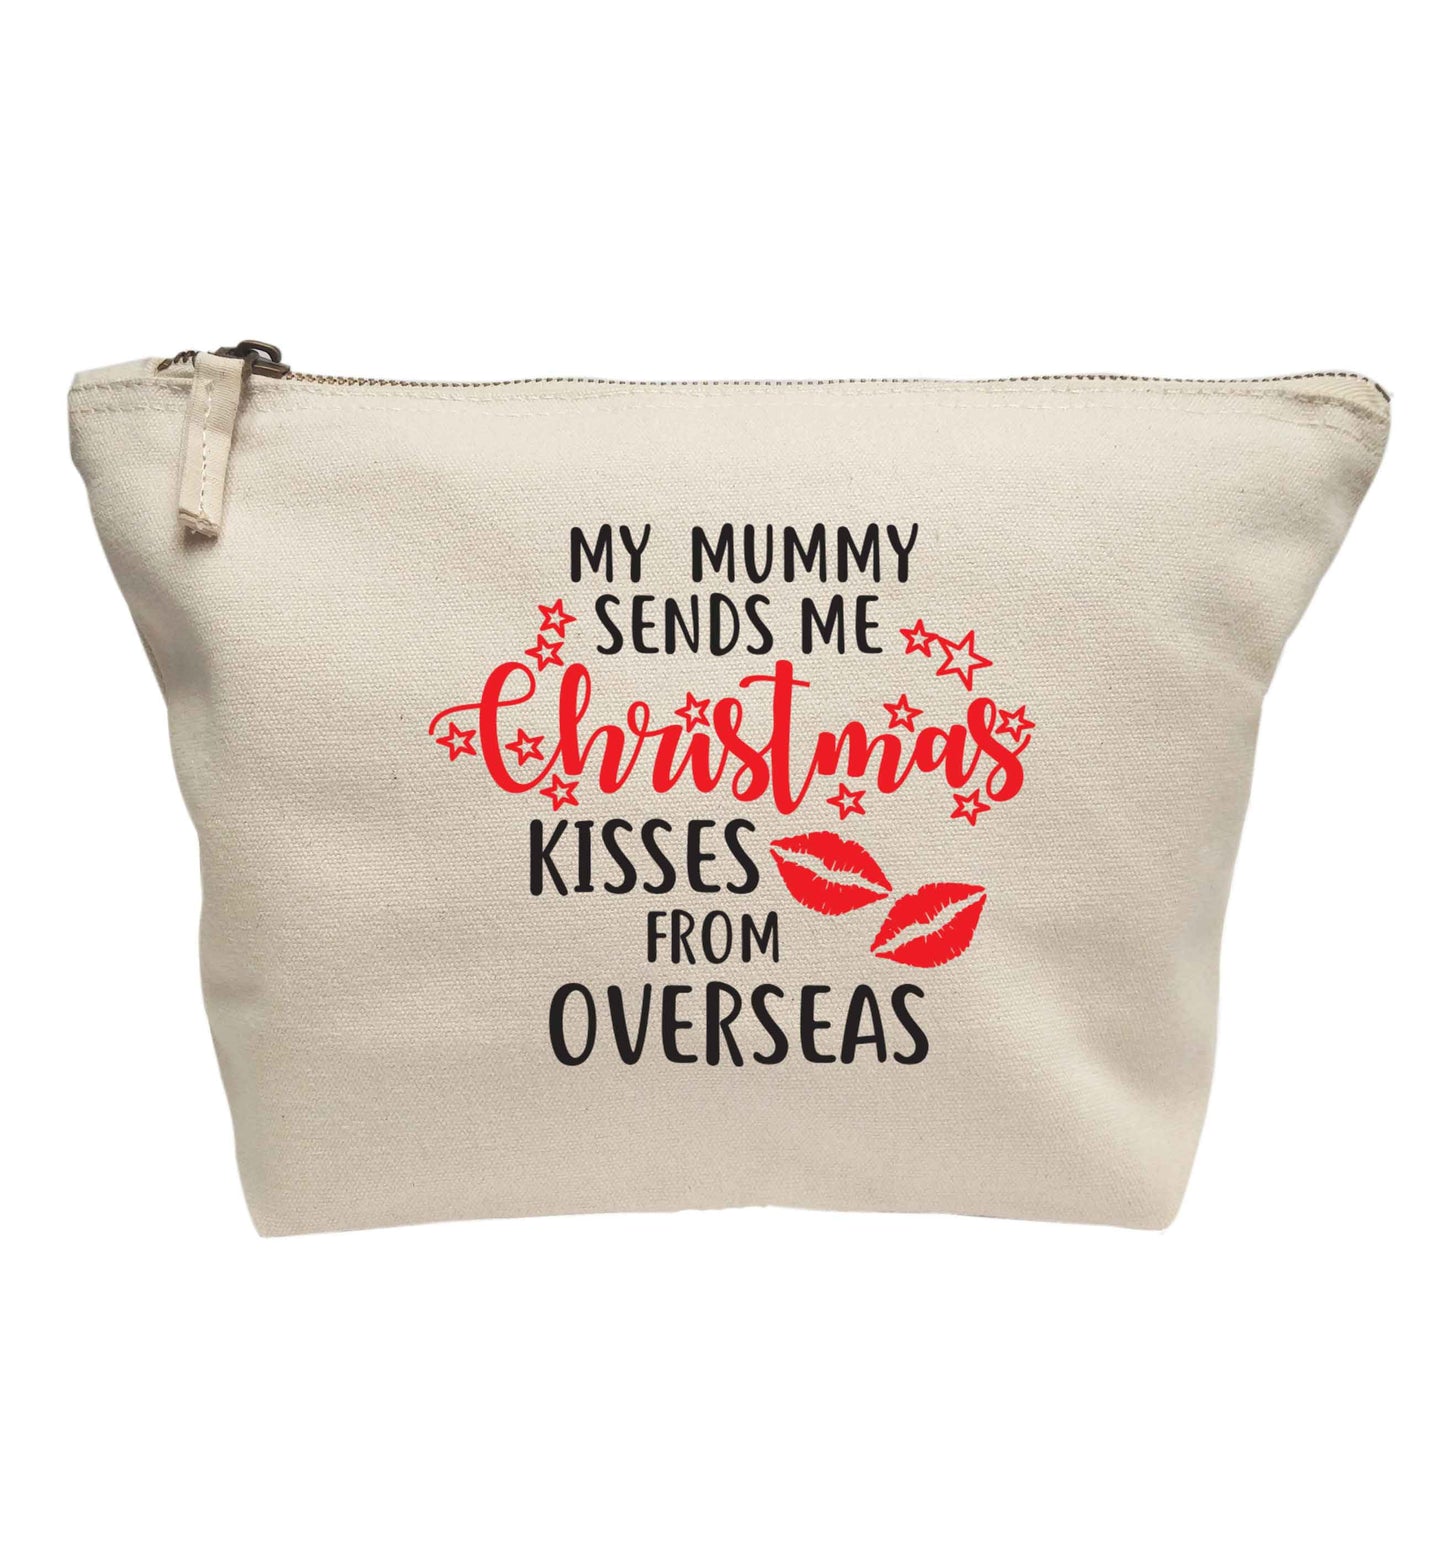 My mummy sends me Christmas kisses from overseas | Makeup / wash bag